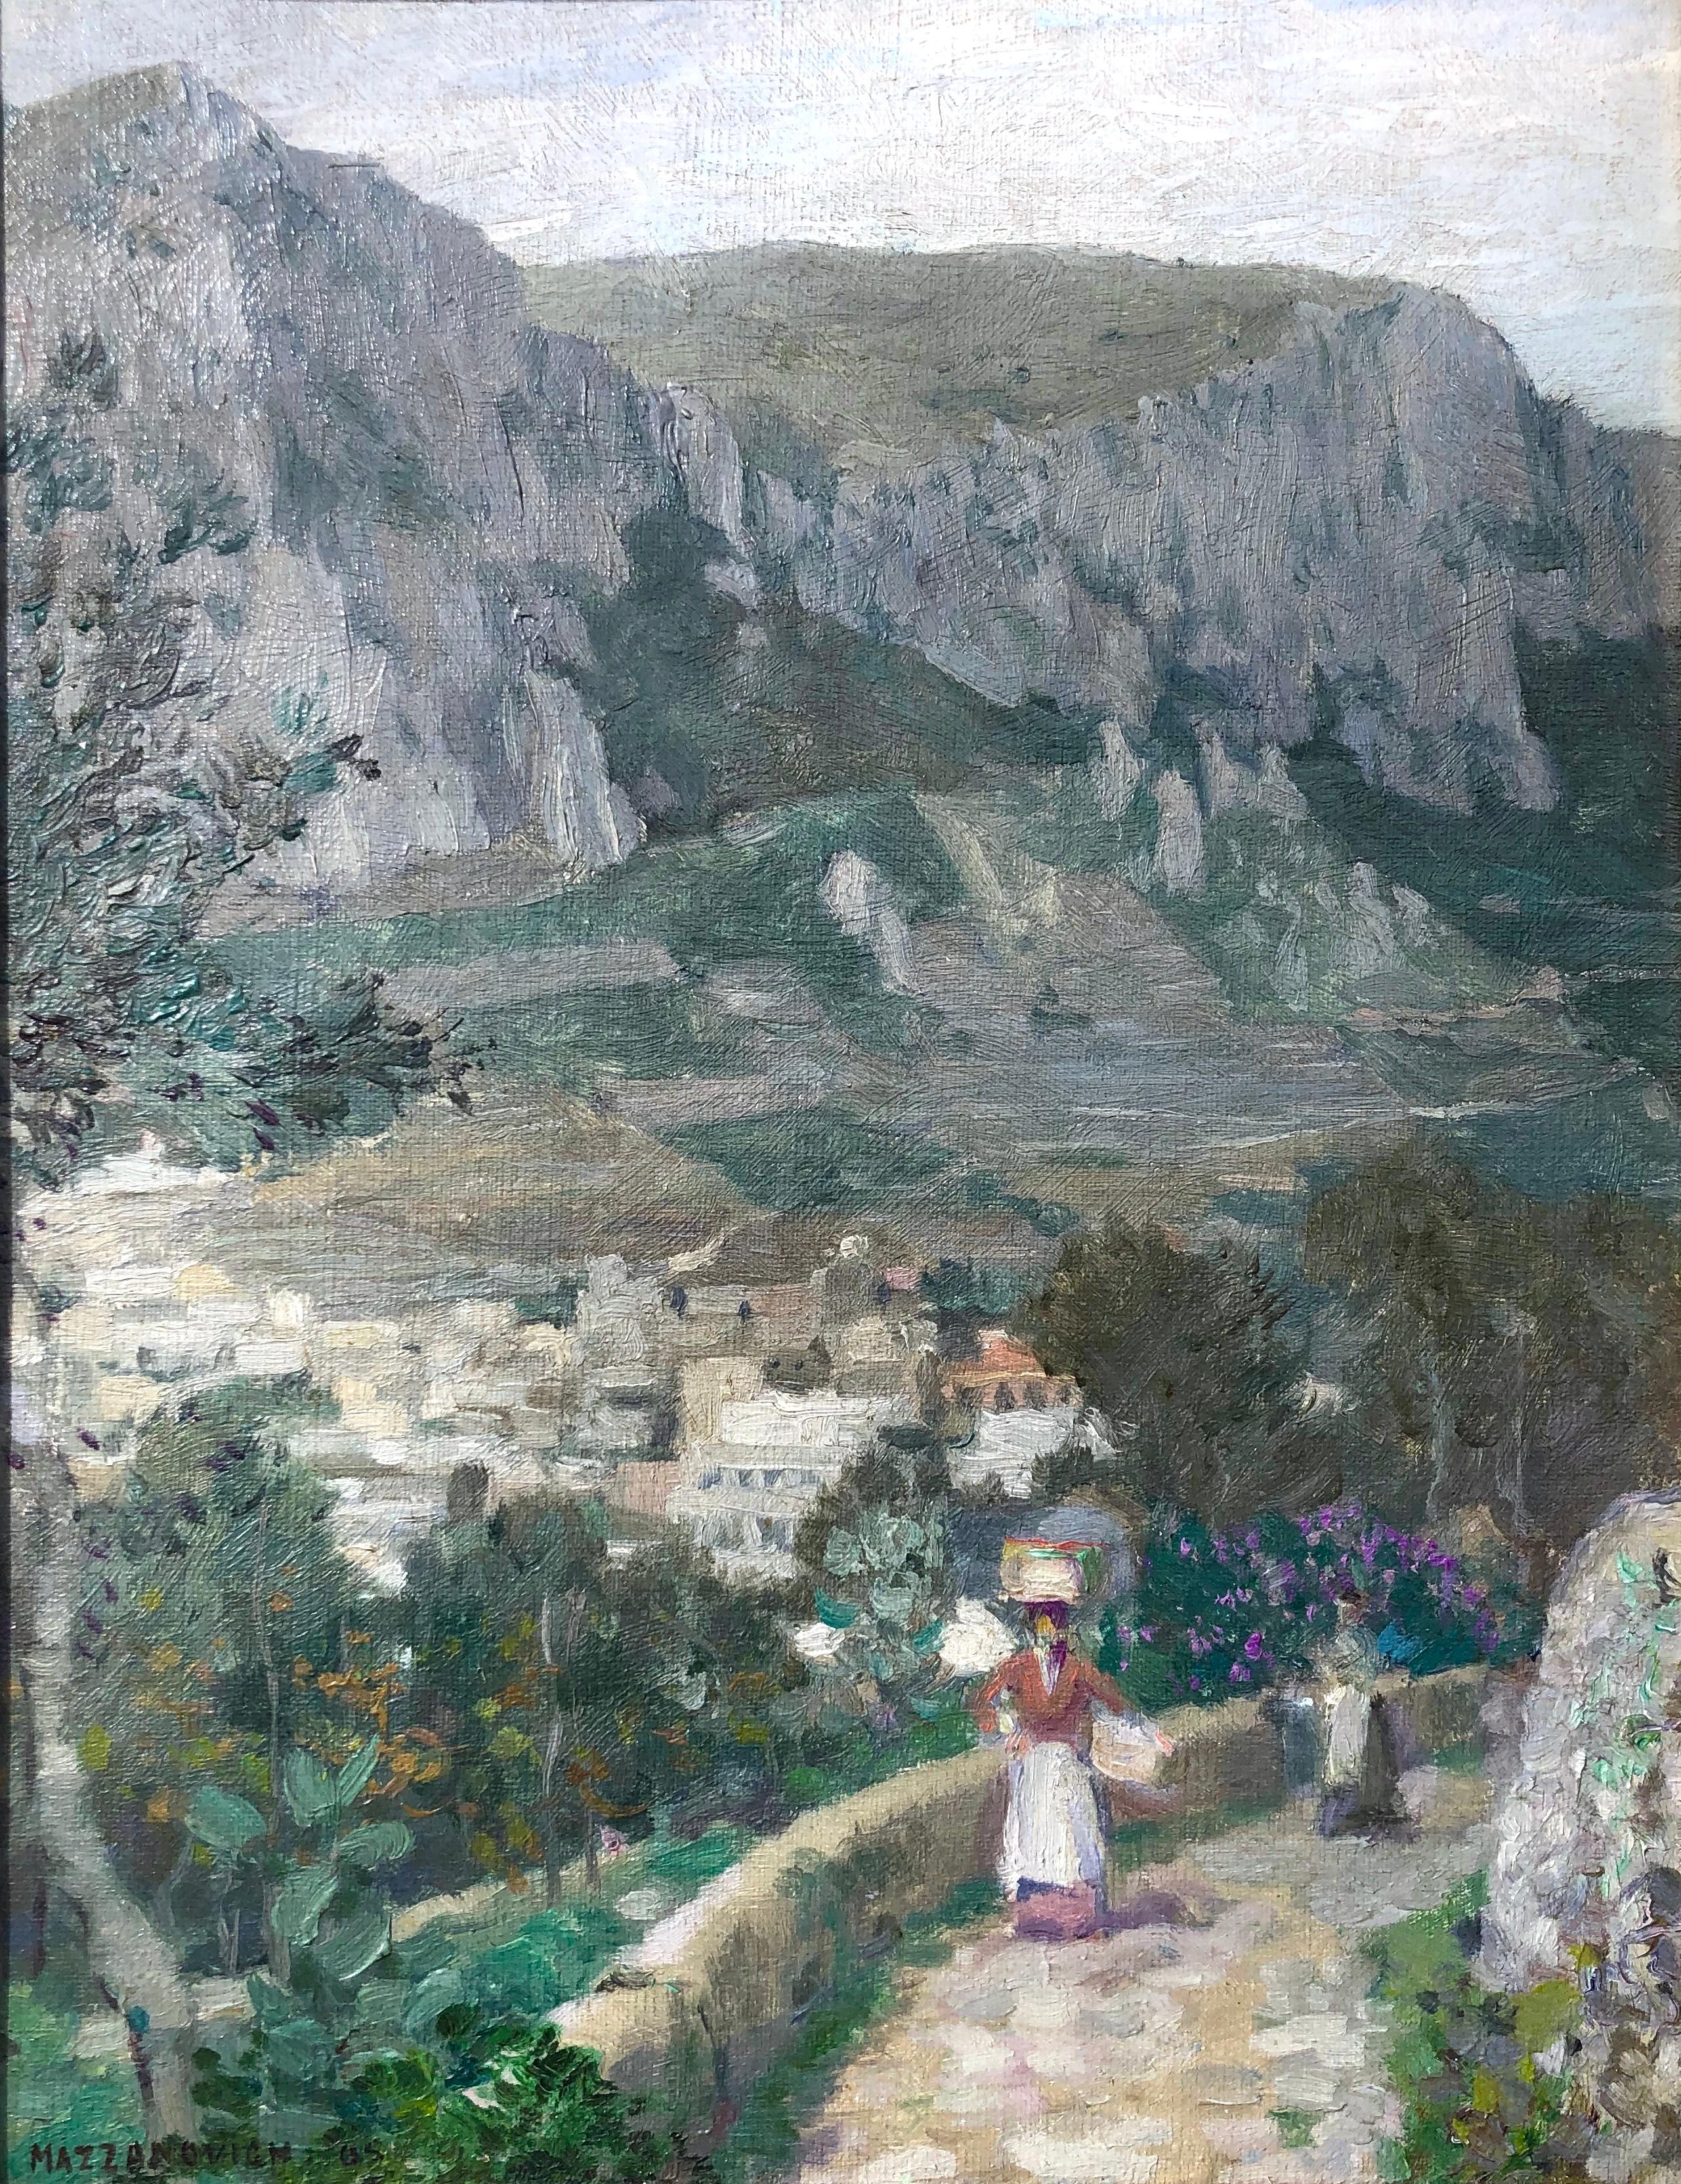 Lawrence Mazzanovich Figurative Painting - Along the Mountain Path, Village in the Valley Below: Impressionism landscape